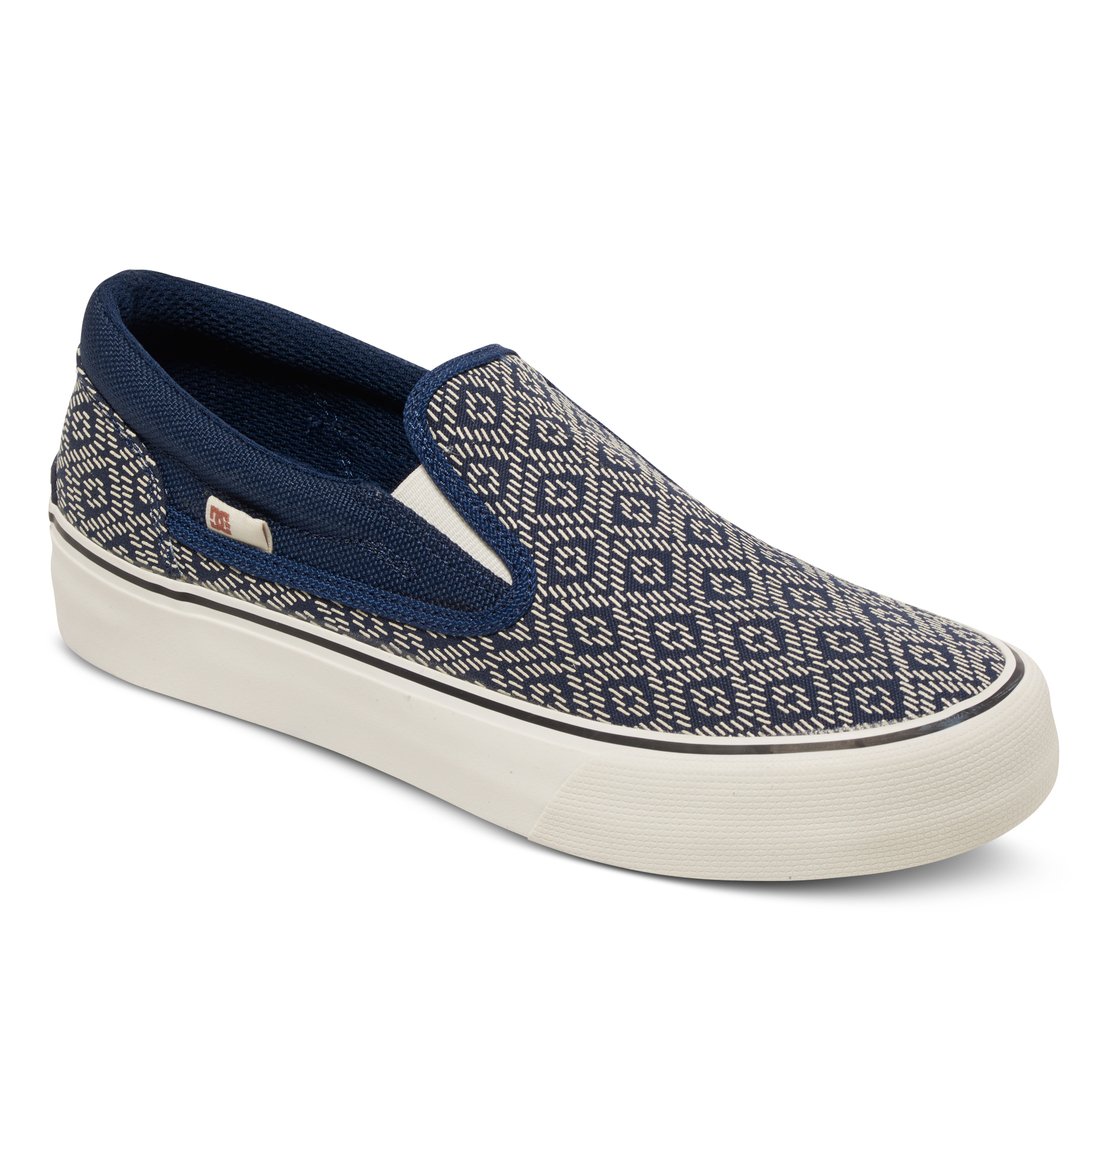 Women's Trase Slip-On SP Shoes 888327570730 | DC Shoes